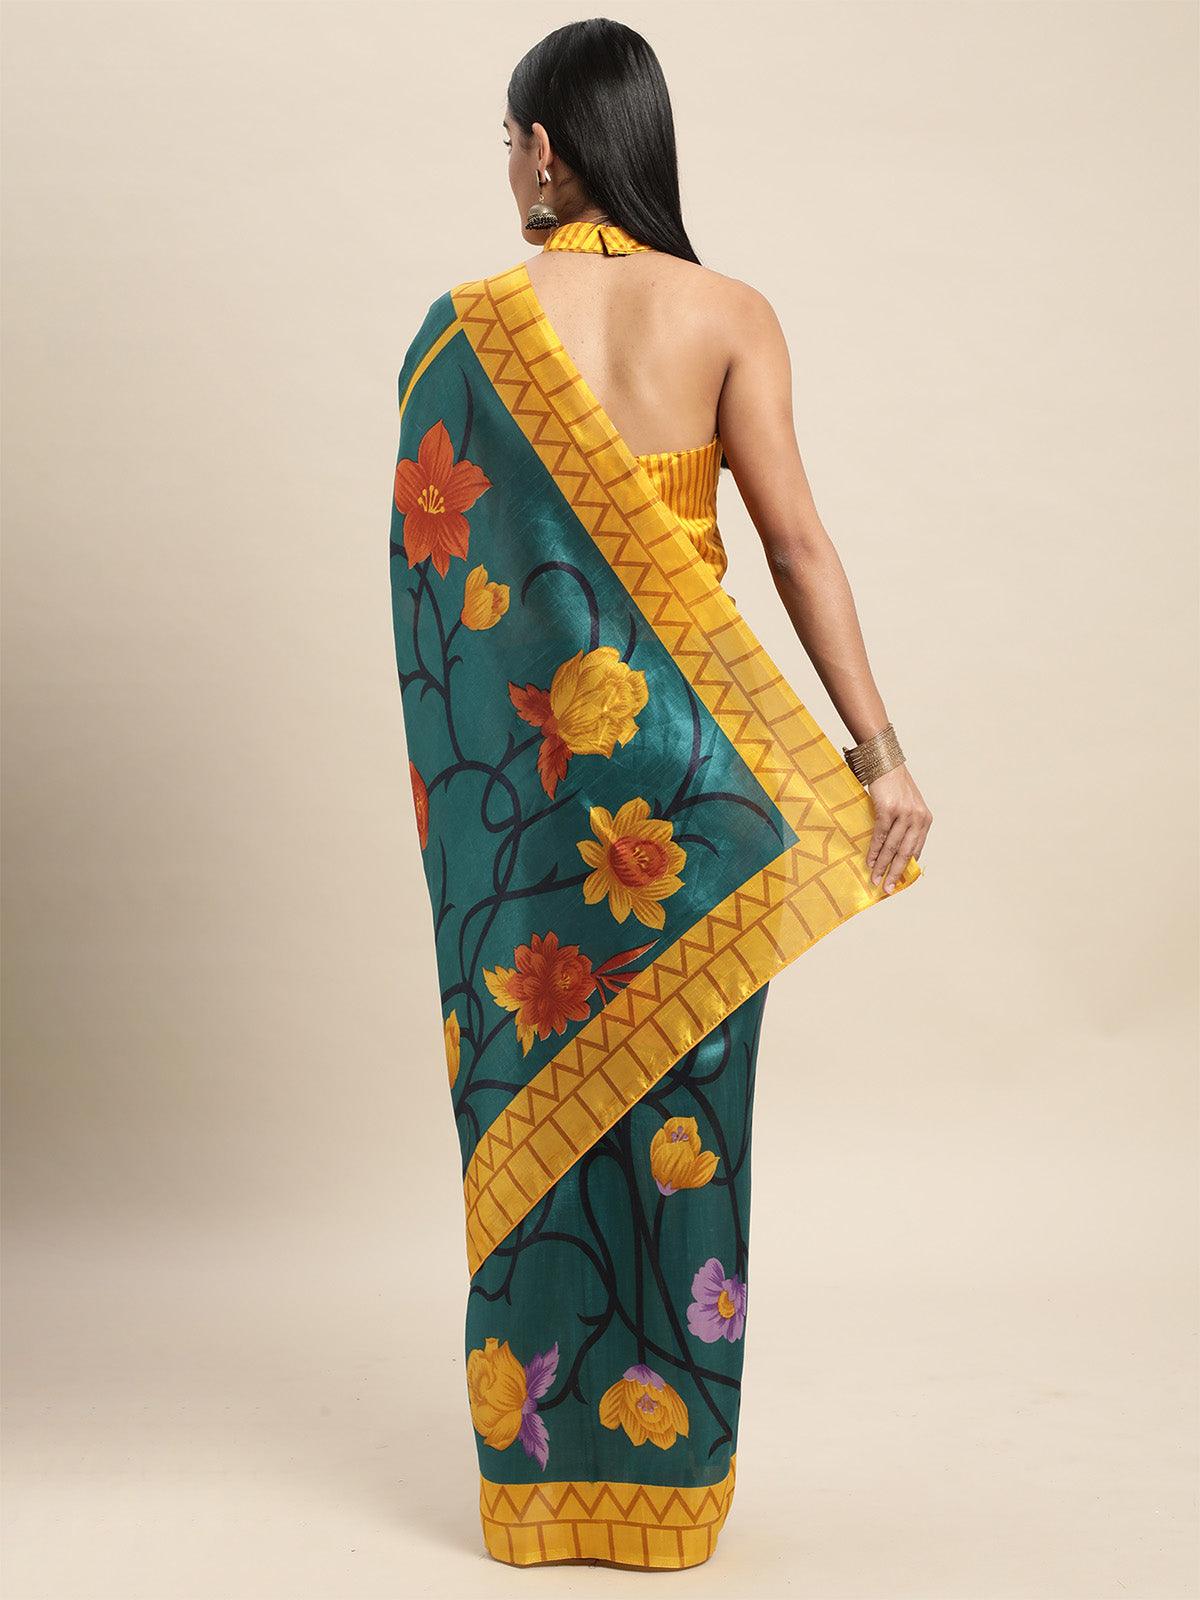 Women's Silk Blend Teal Blue Printed Saree With Blouse Piece - Odette